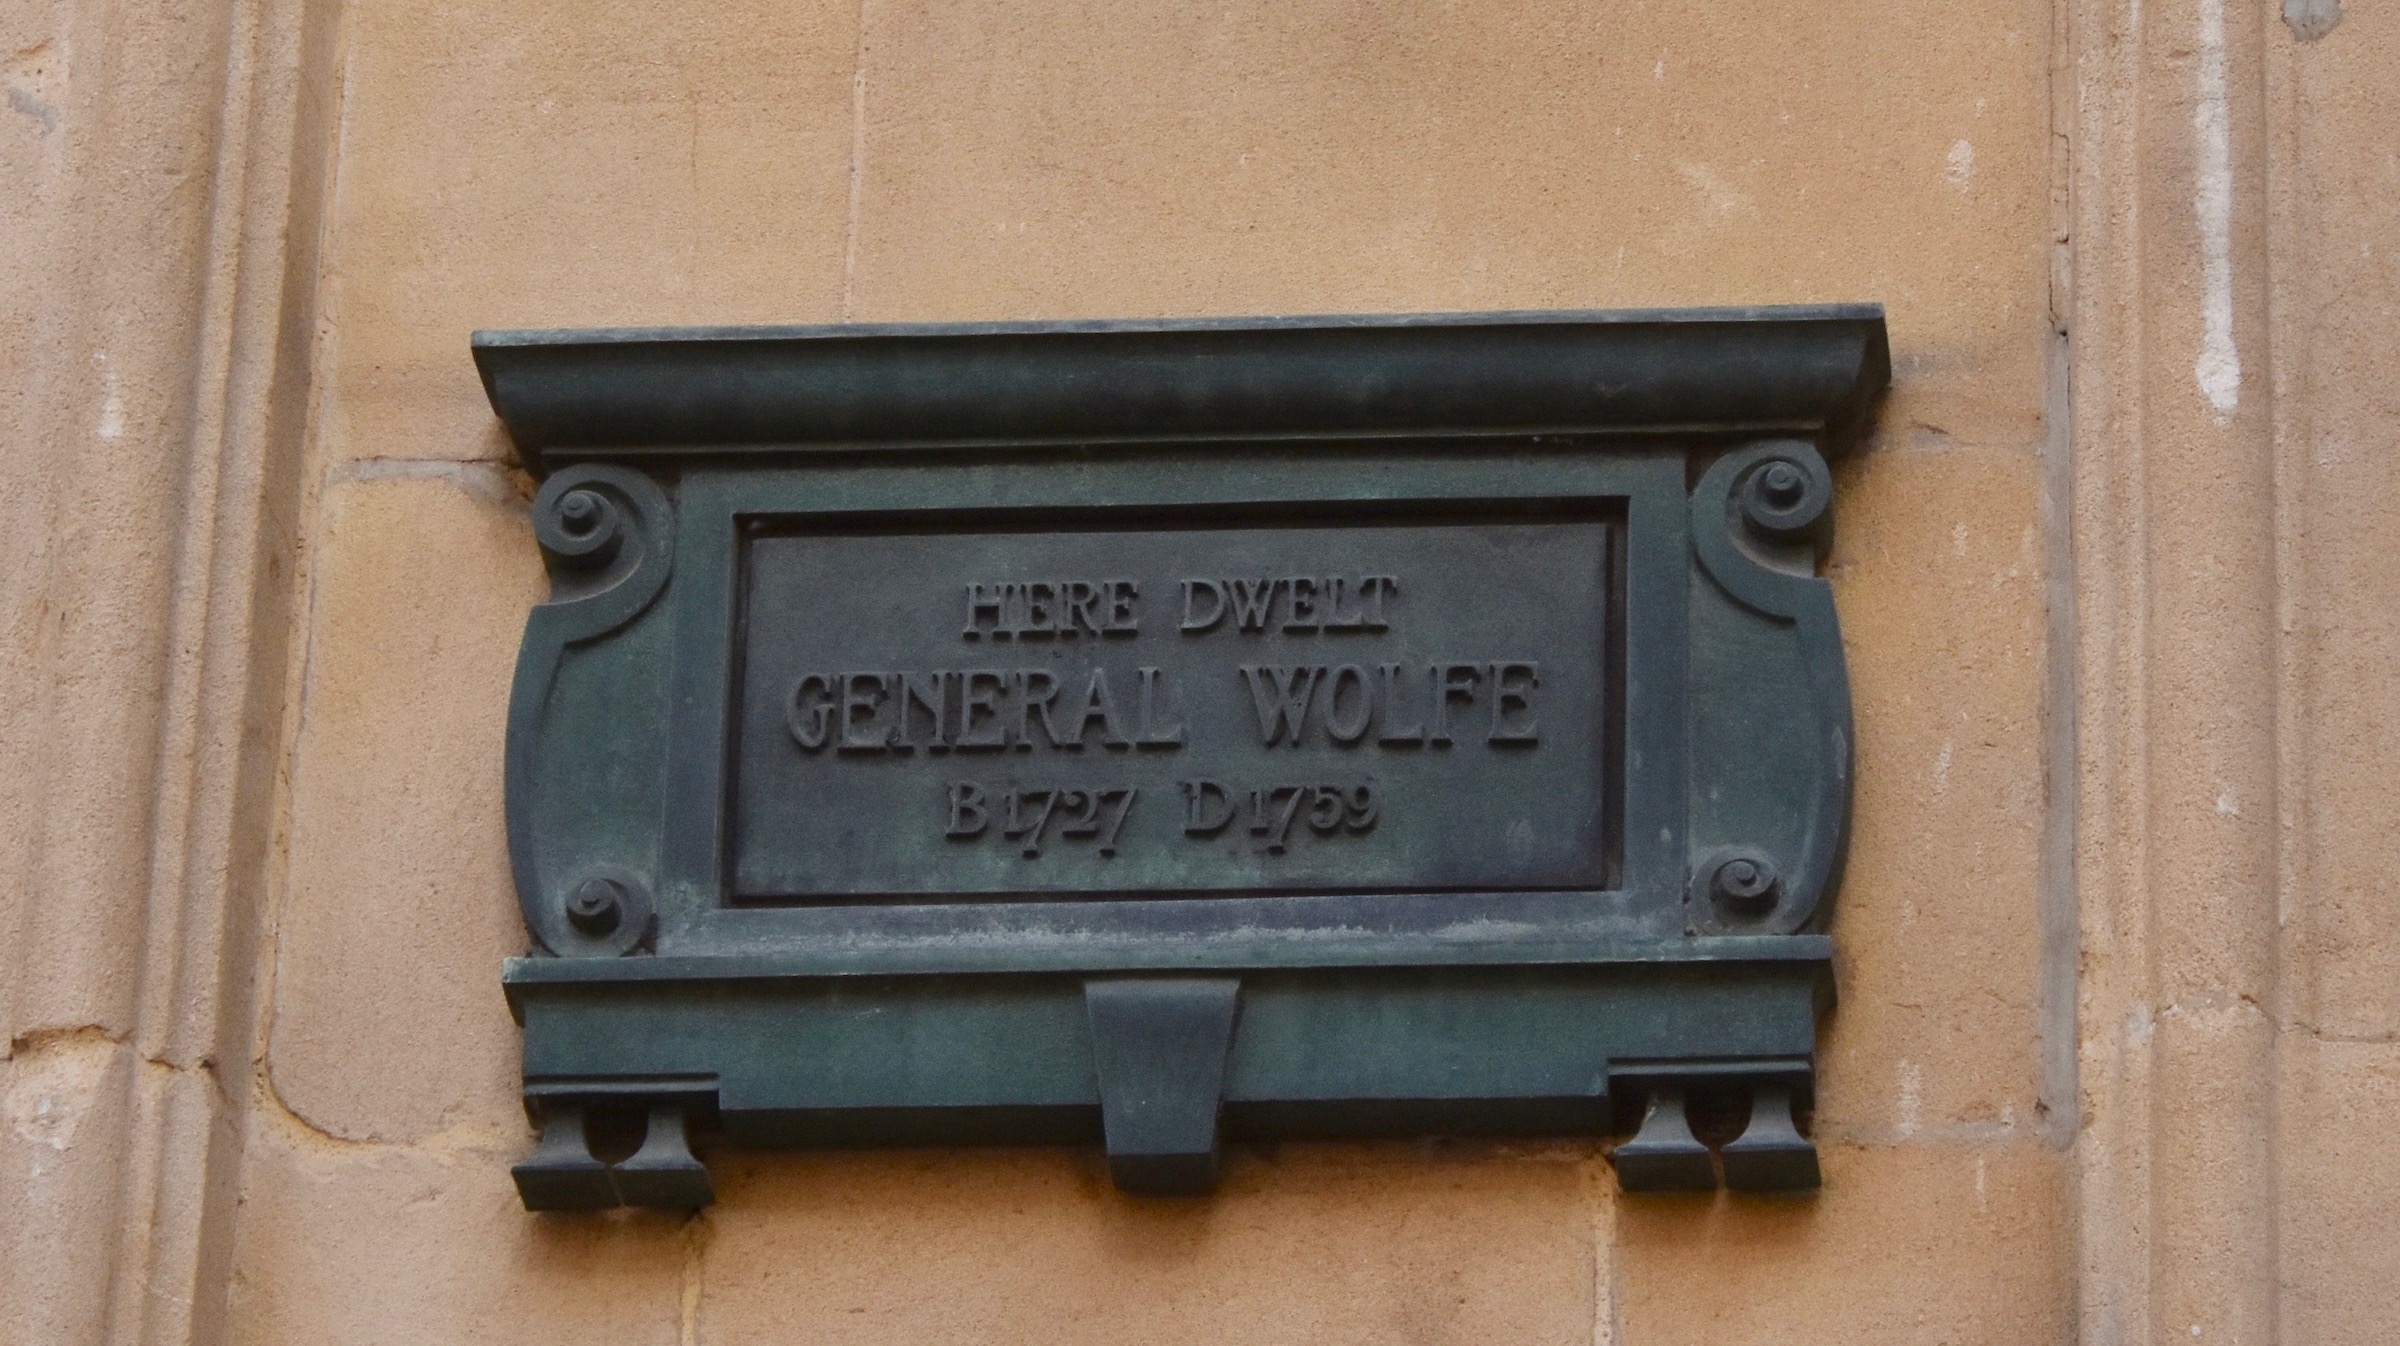  General Wolfe Lived Here, Bath